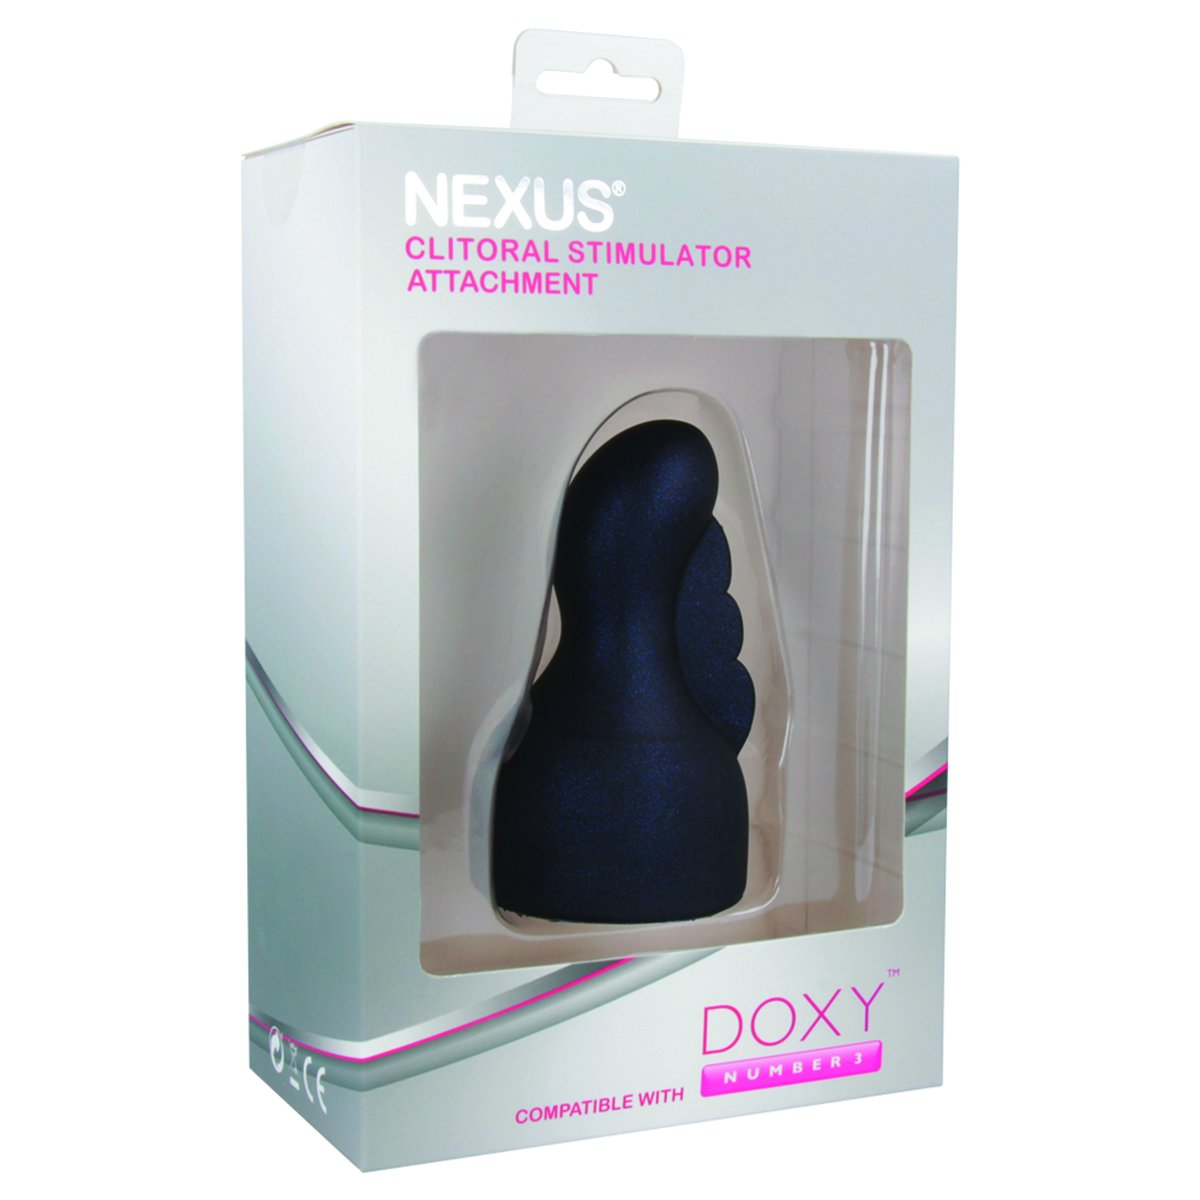 Doxy by Nexus Clitoral Attachment - Buy At Luxury Toy X - Free 3-Day Shipping